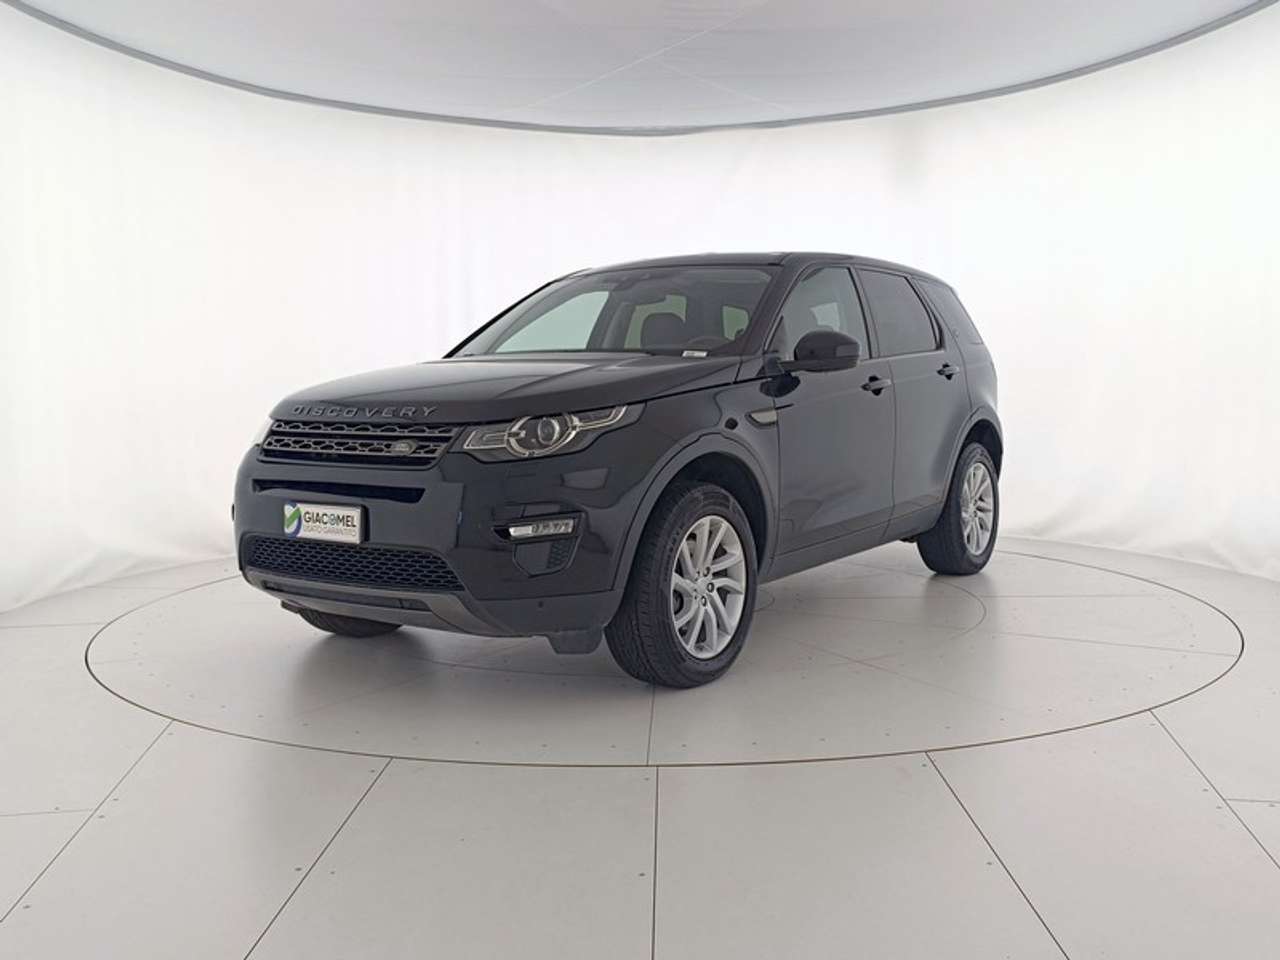 Land Rover Discovery Sport 2.0 td4 pure business edition awd 150cv auto my18